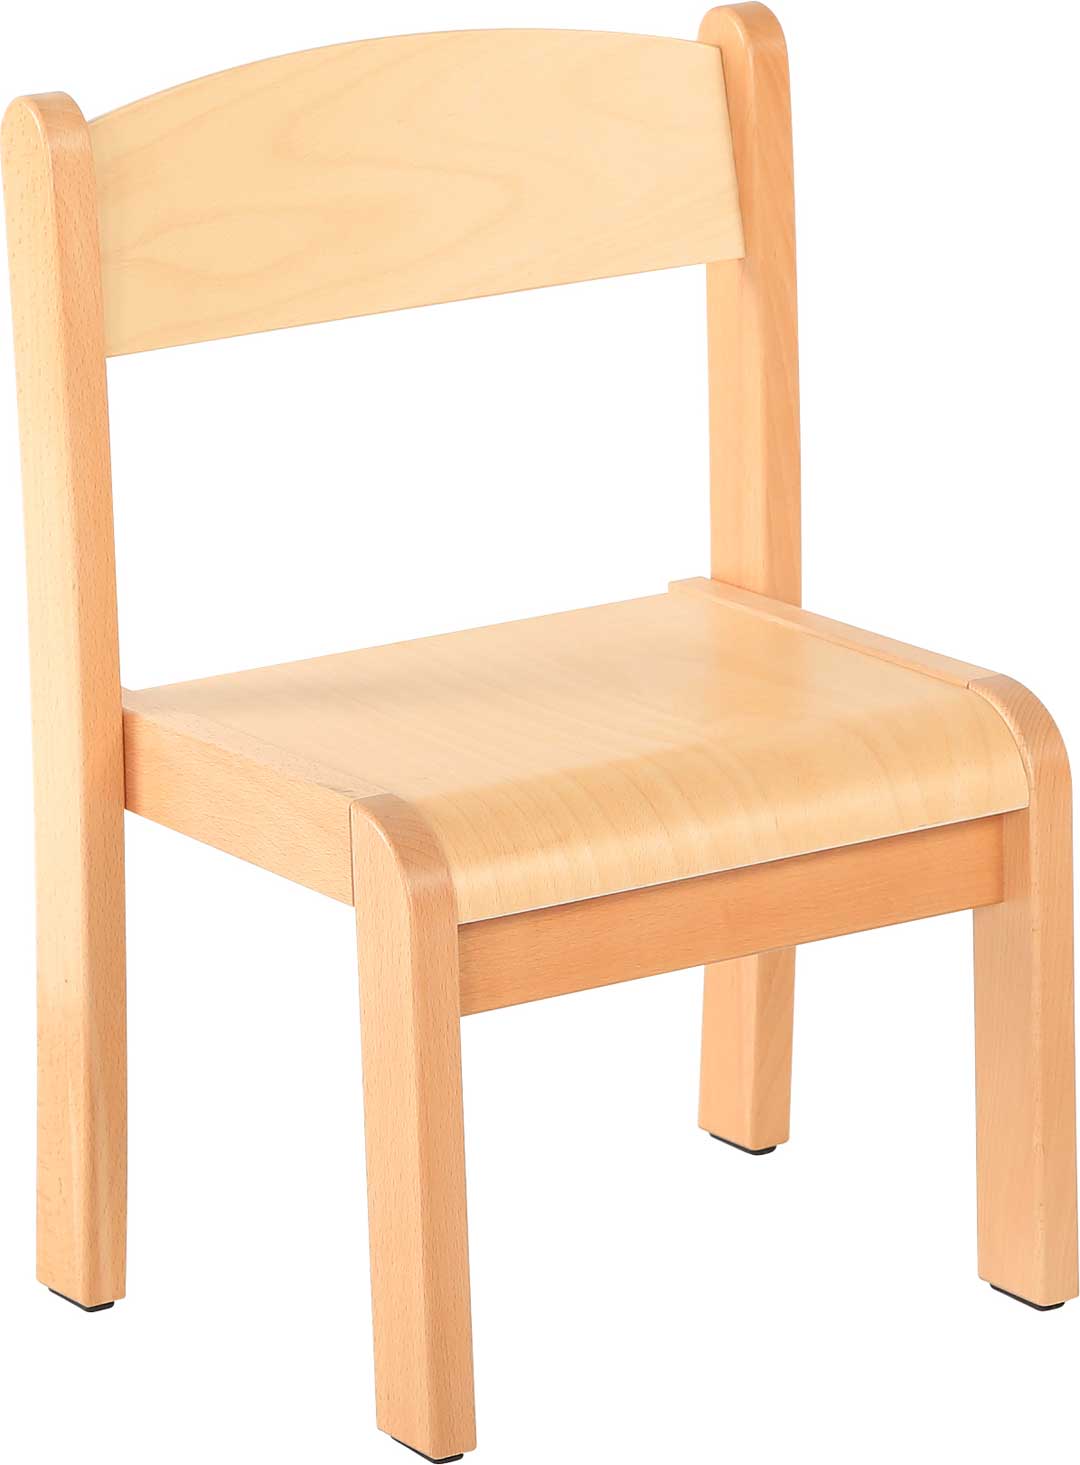 Philip Wooden Chair  38cm All Colours